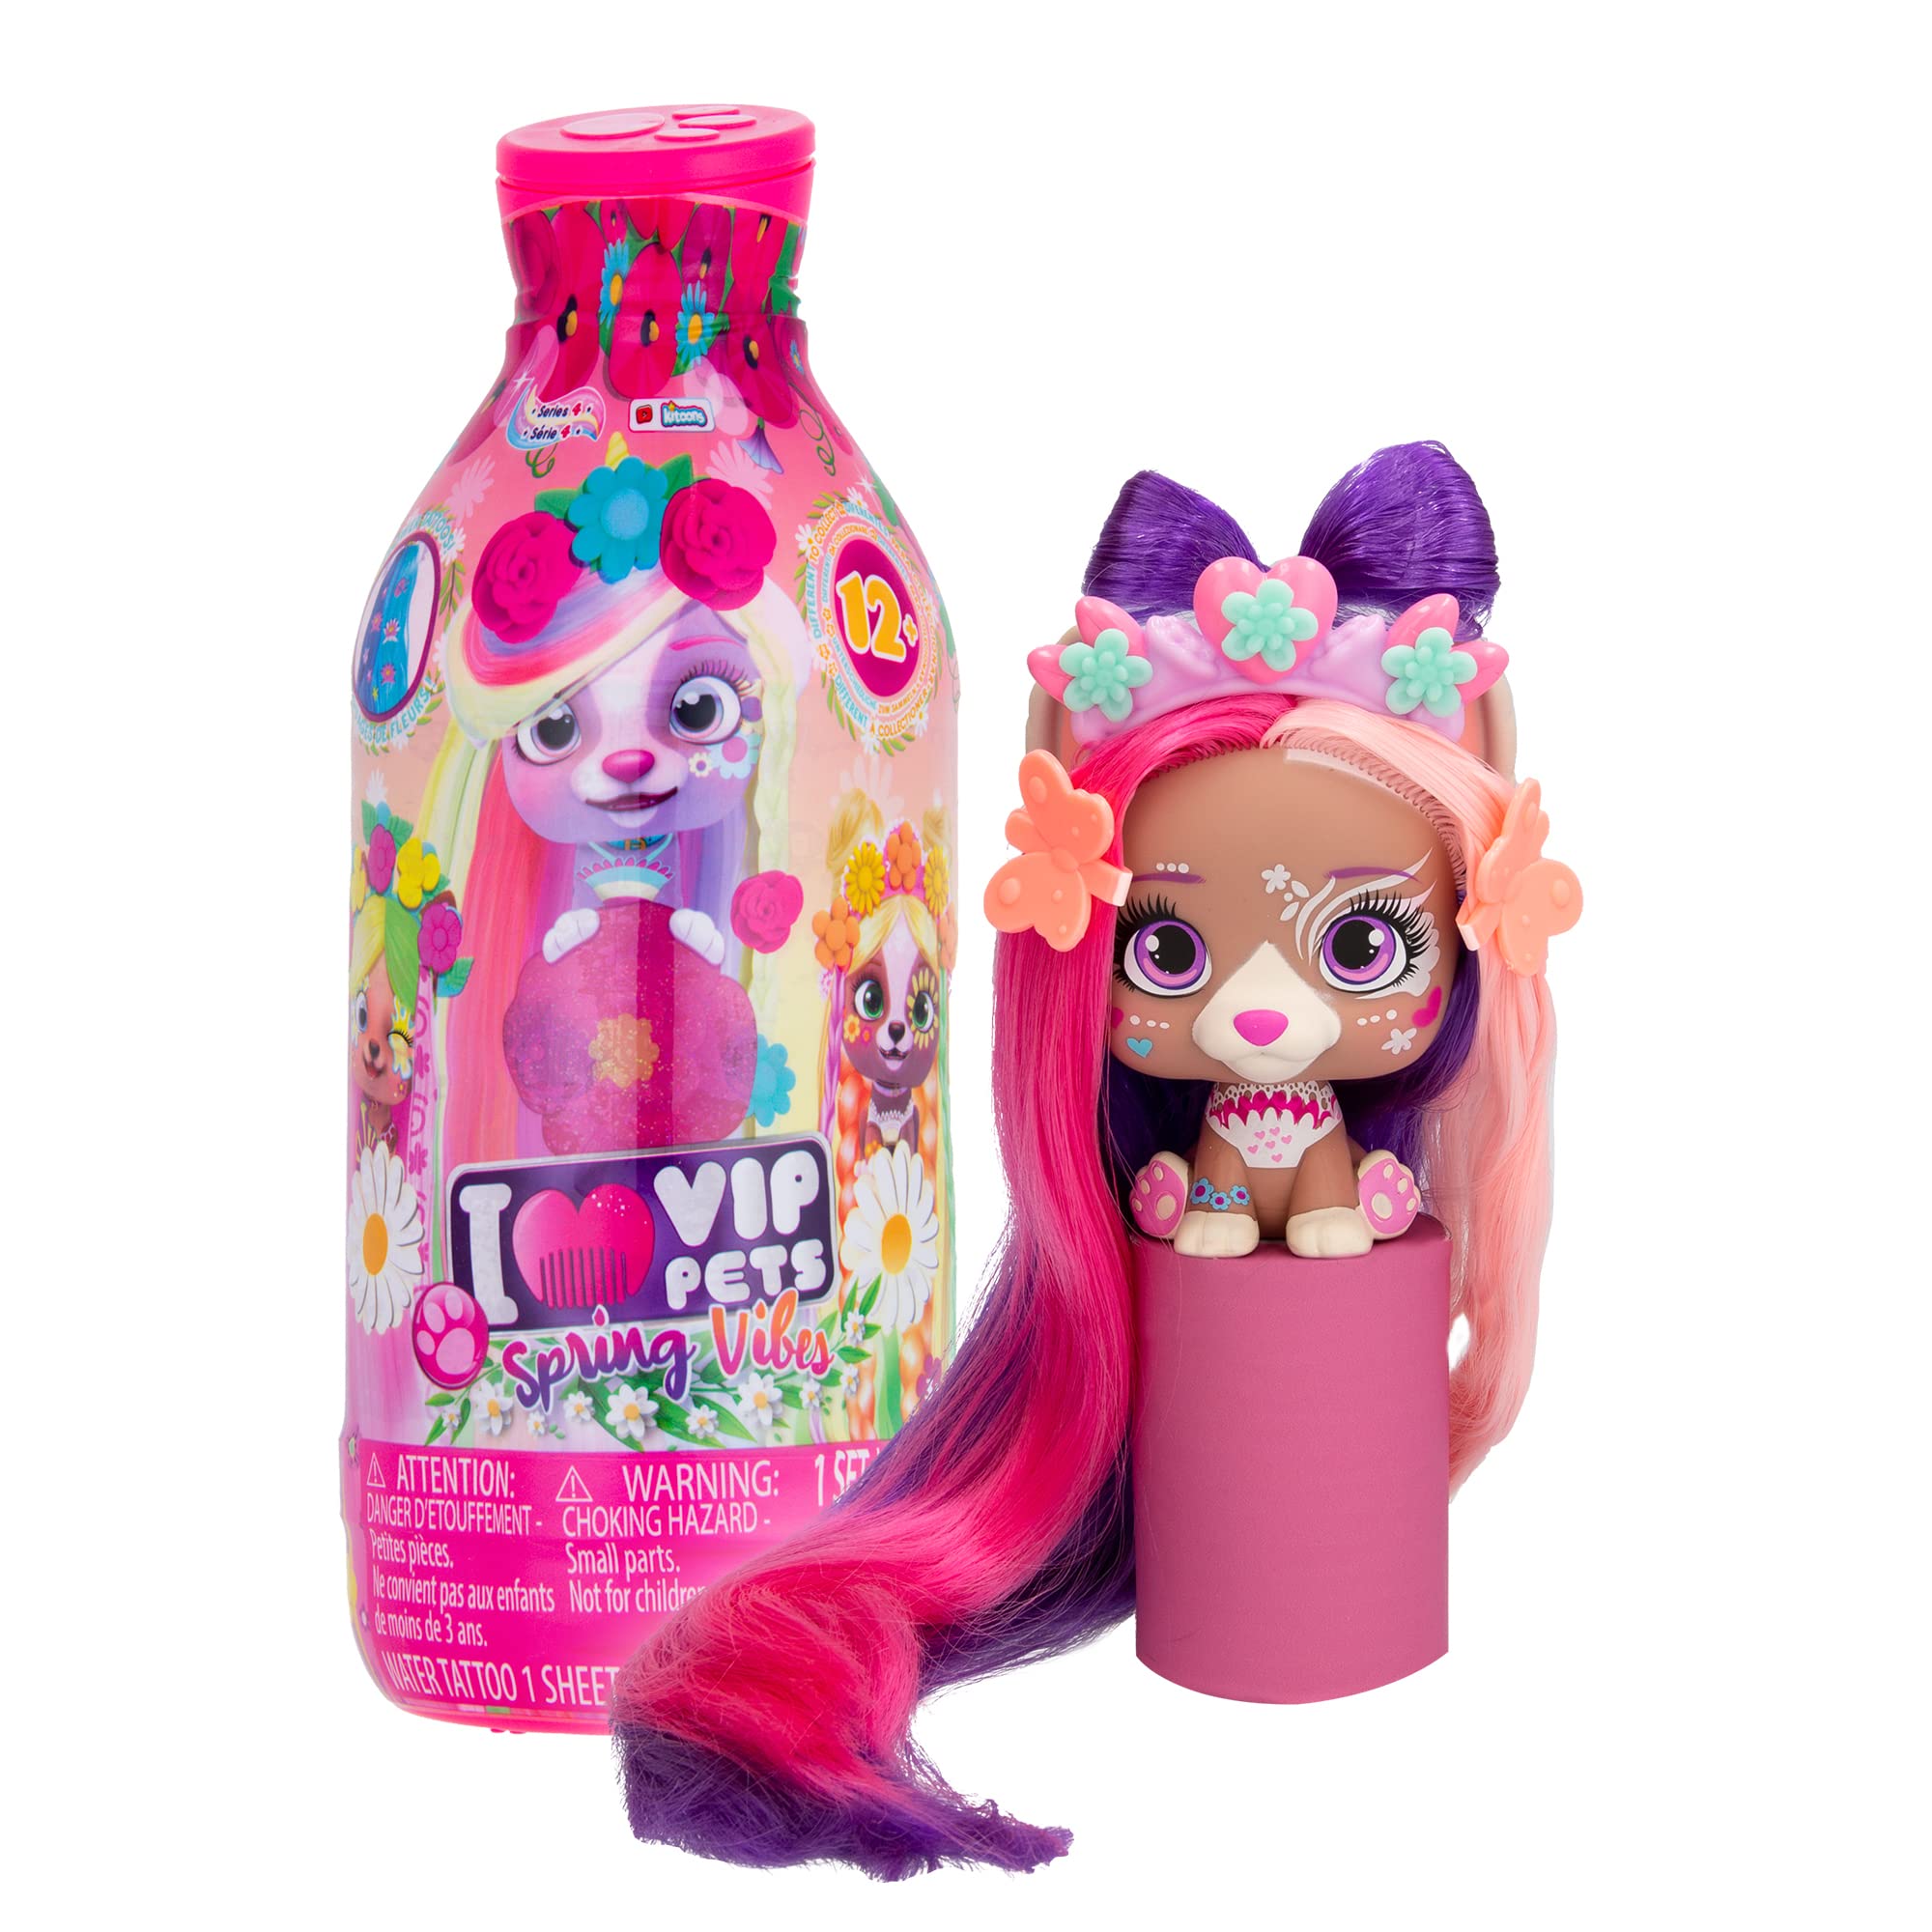 IMC Toys VIP Pets Spring Vibes Series (1 VIP Pets Doll, 9 Surprises, 6 Accessories) $7 + Free Shipping w/ Prime or Orders $25